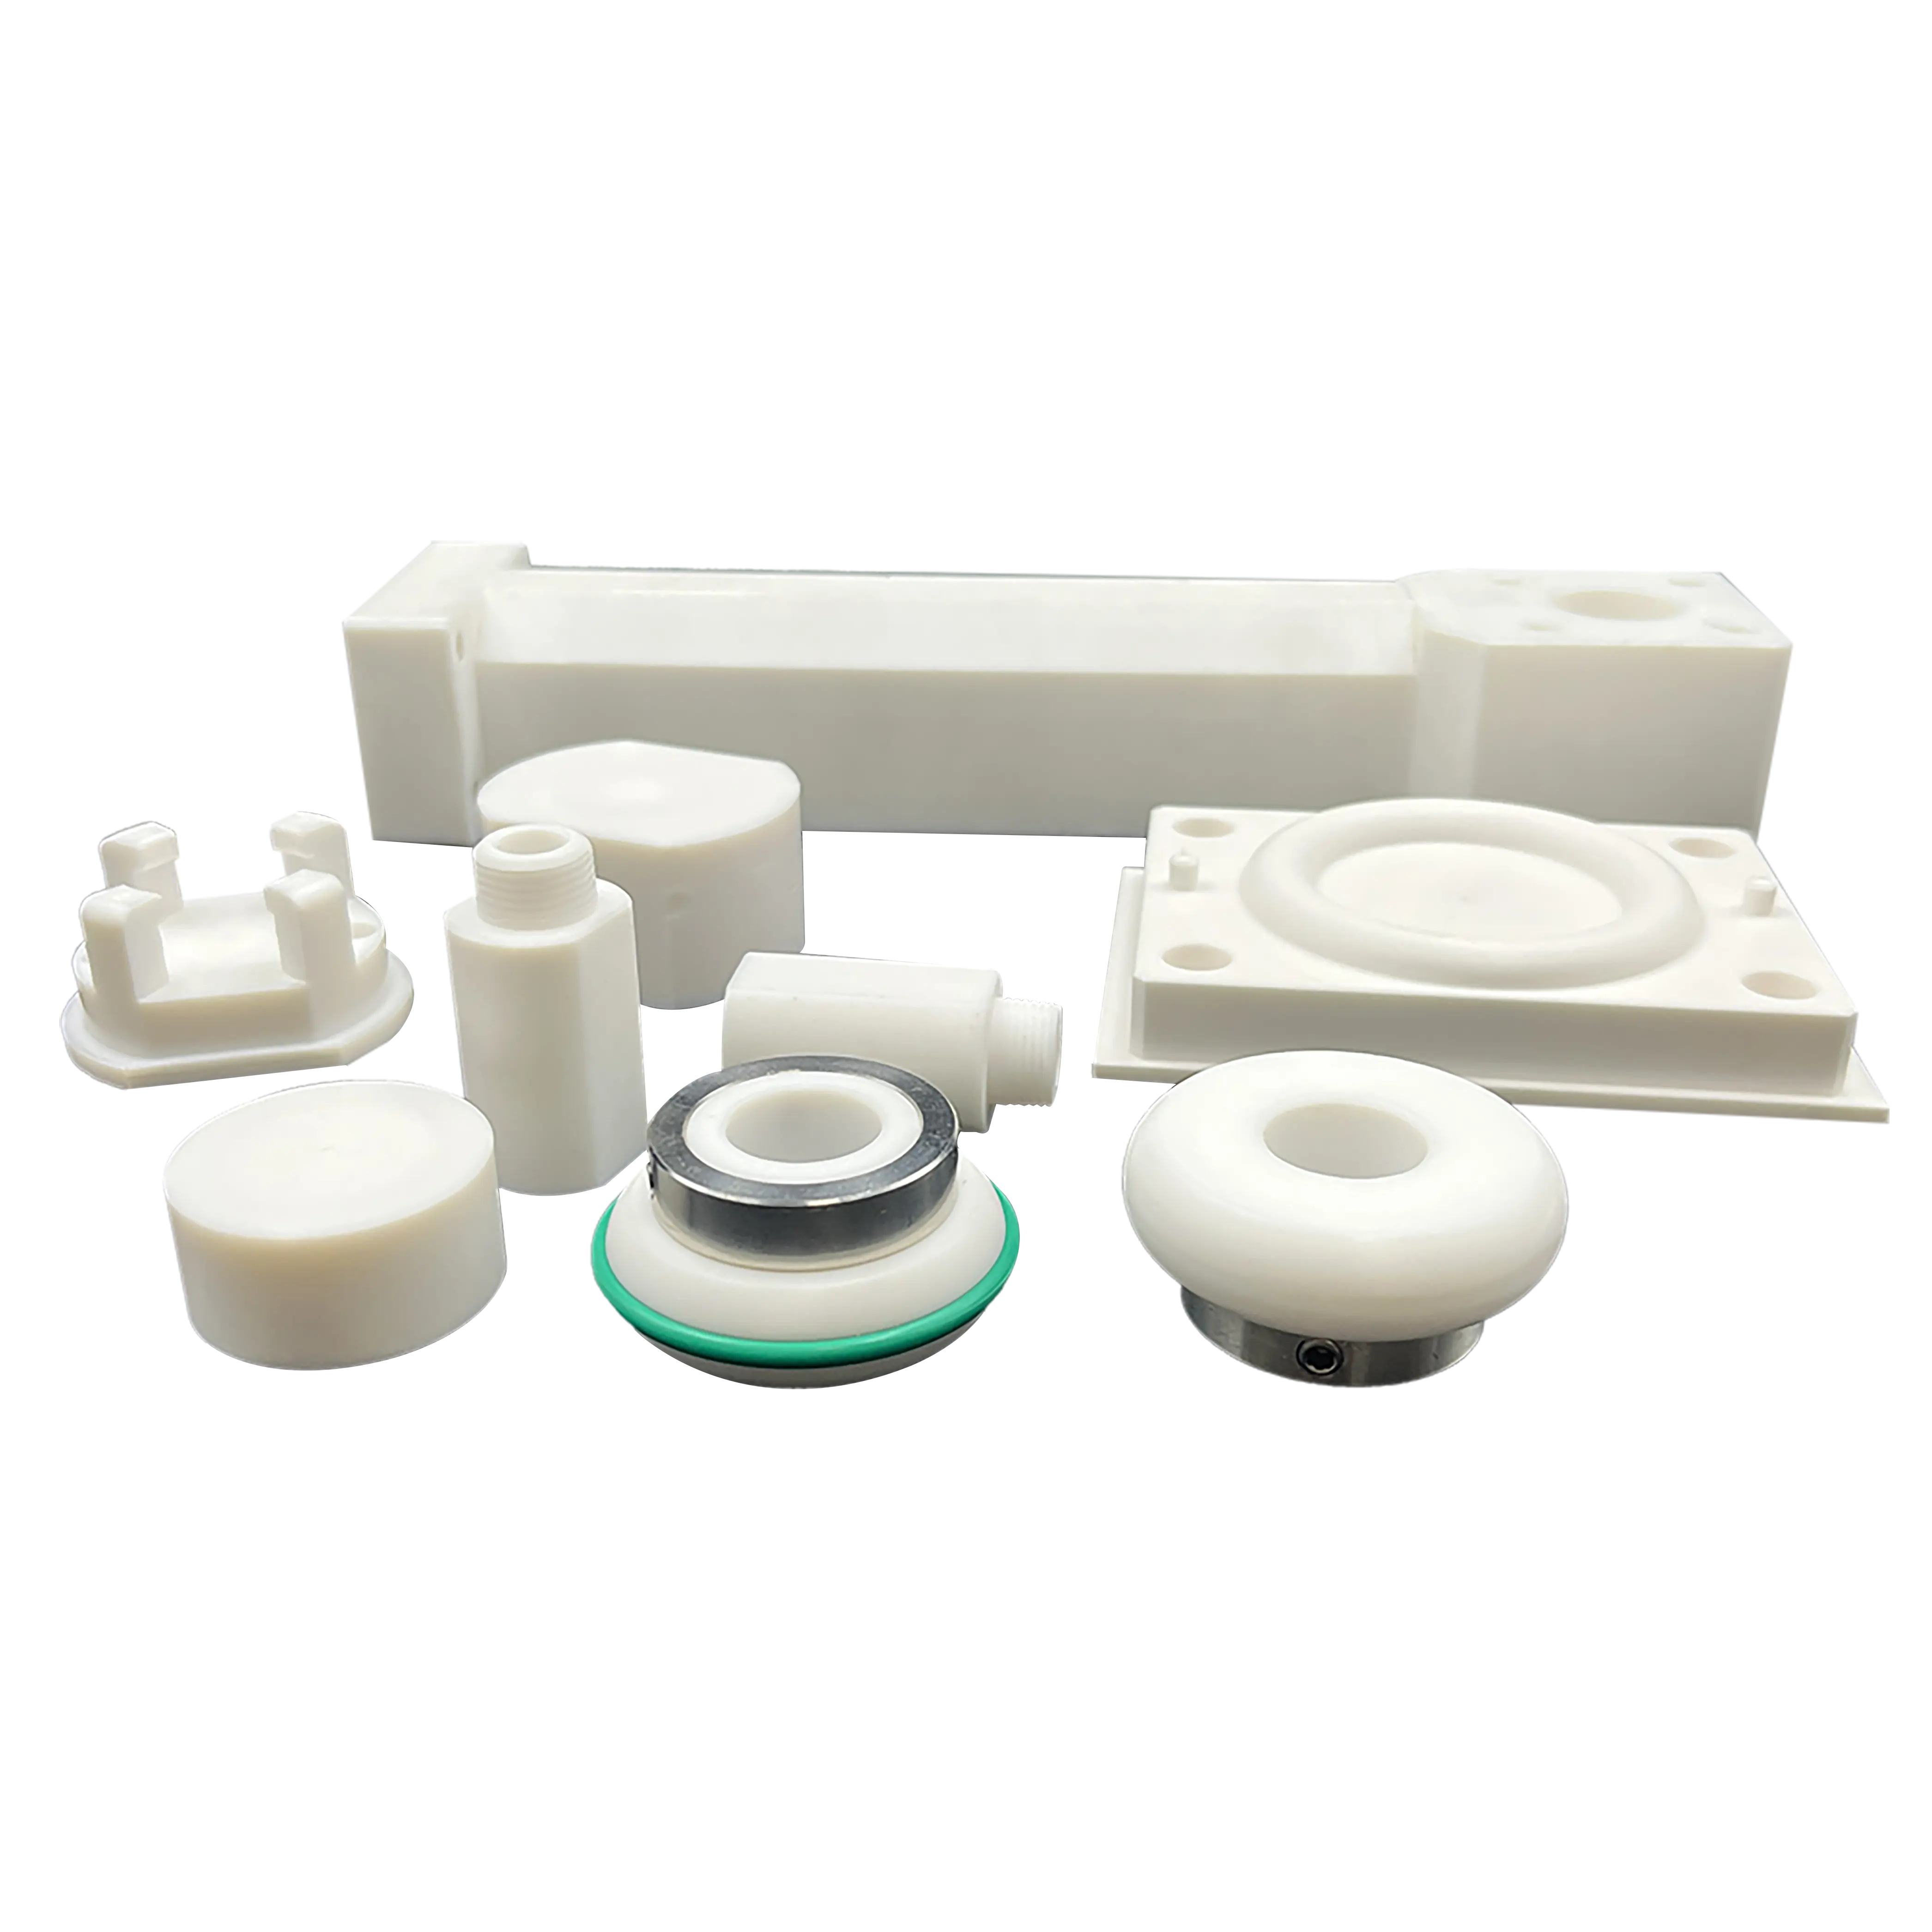 PTFE parts High temperature resistance to chemicals and solvents PTFE Machining parts Turning machined Custom CNC PTFE part